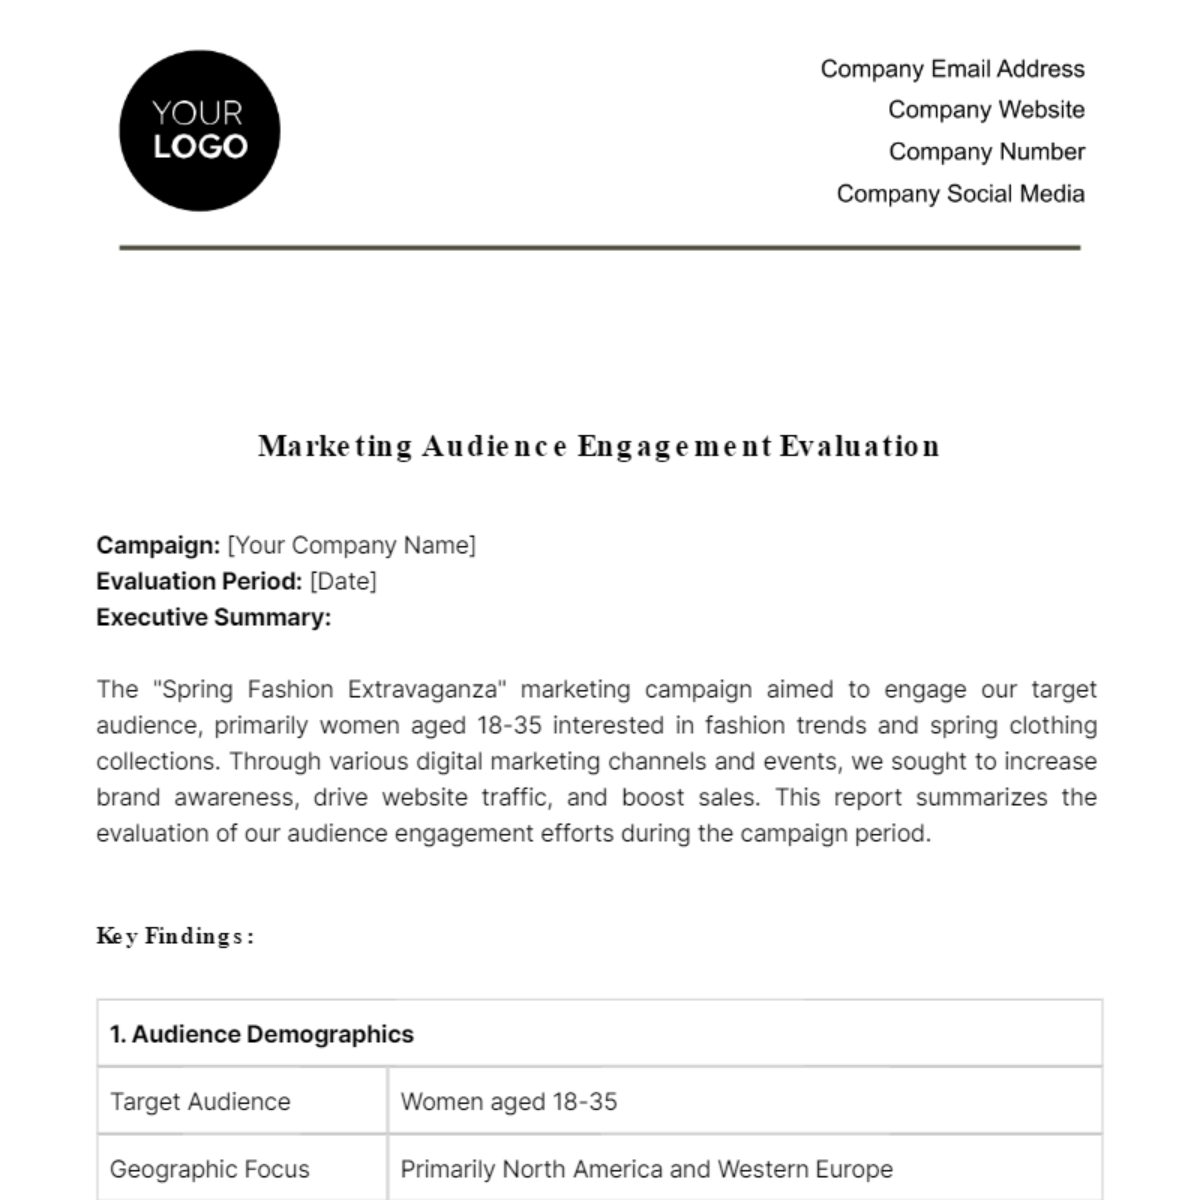 Marketing Audience Engagement Evaluation Template